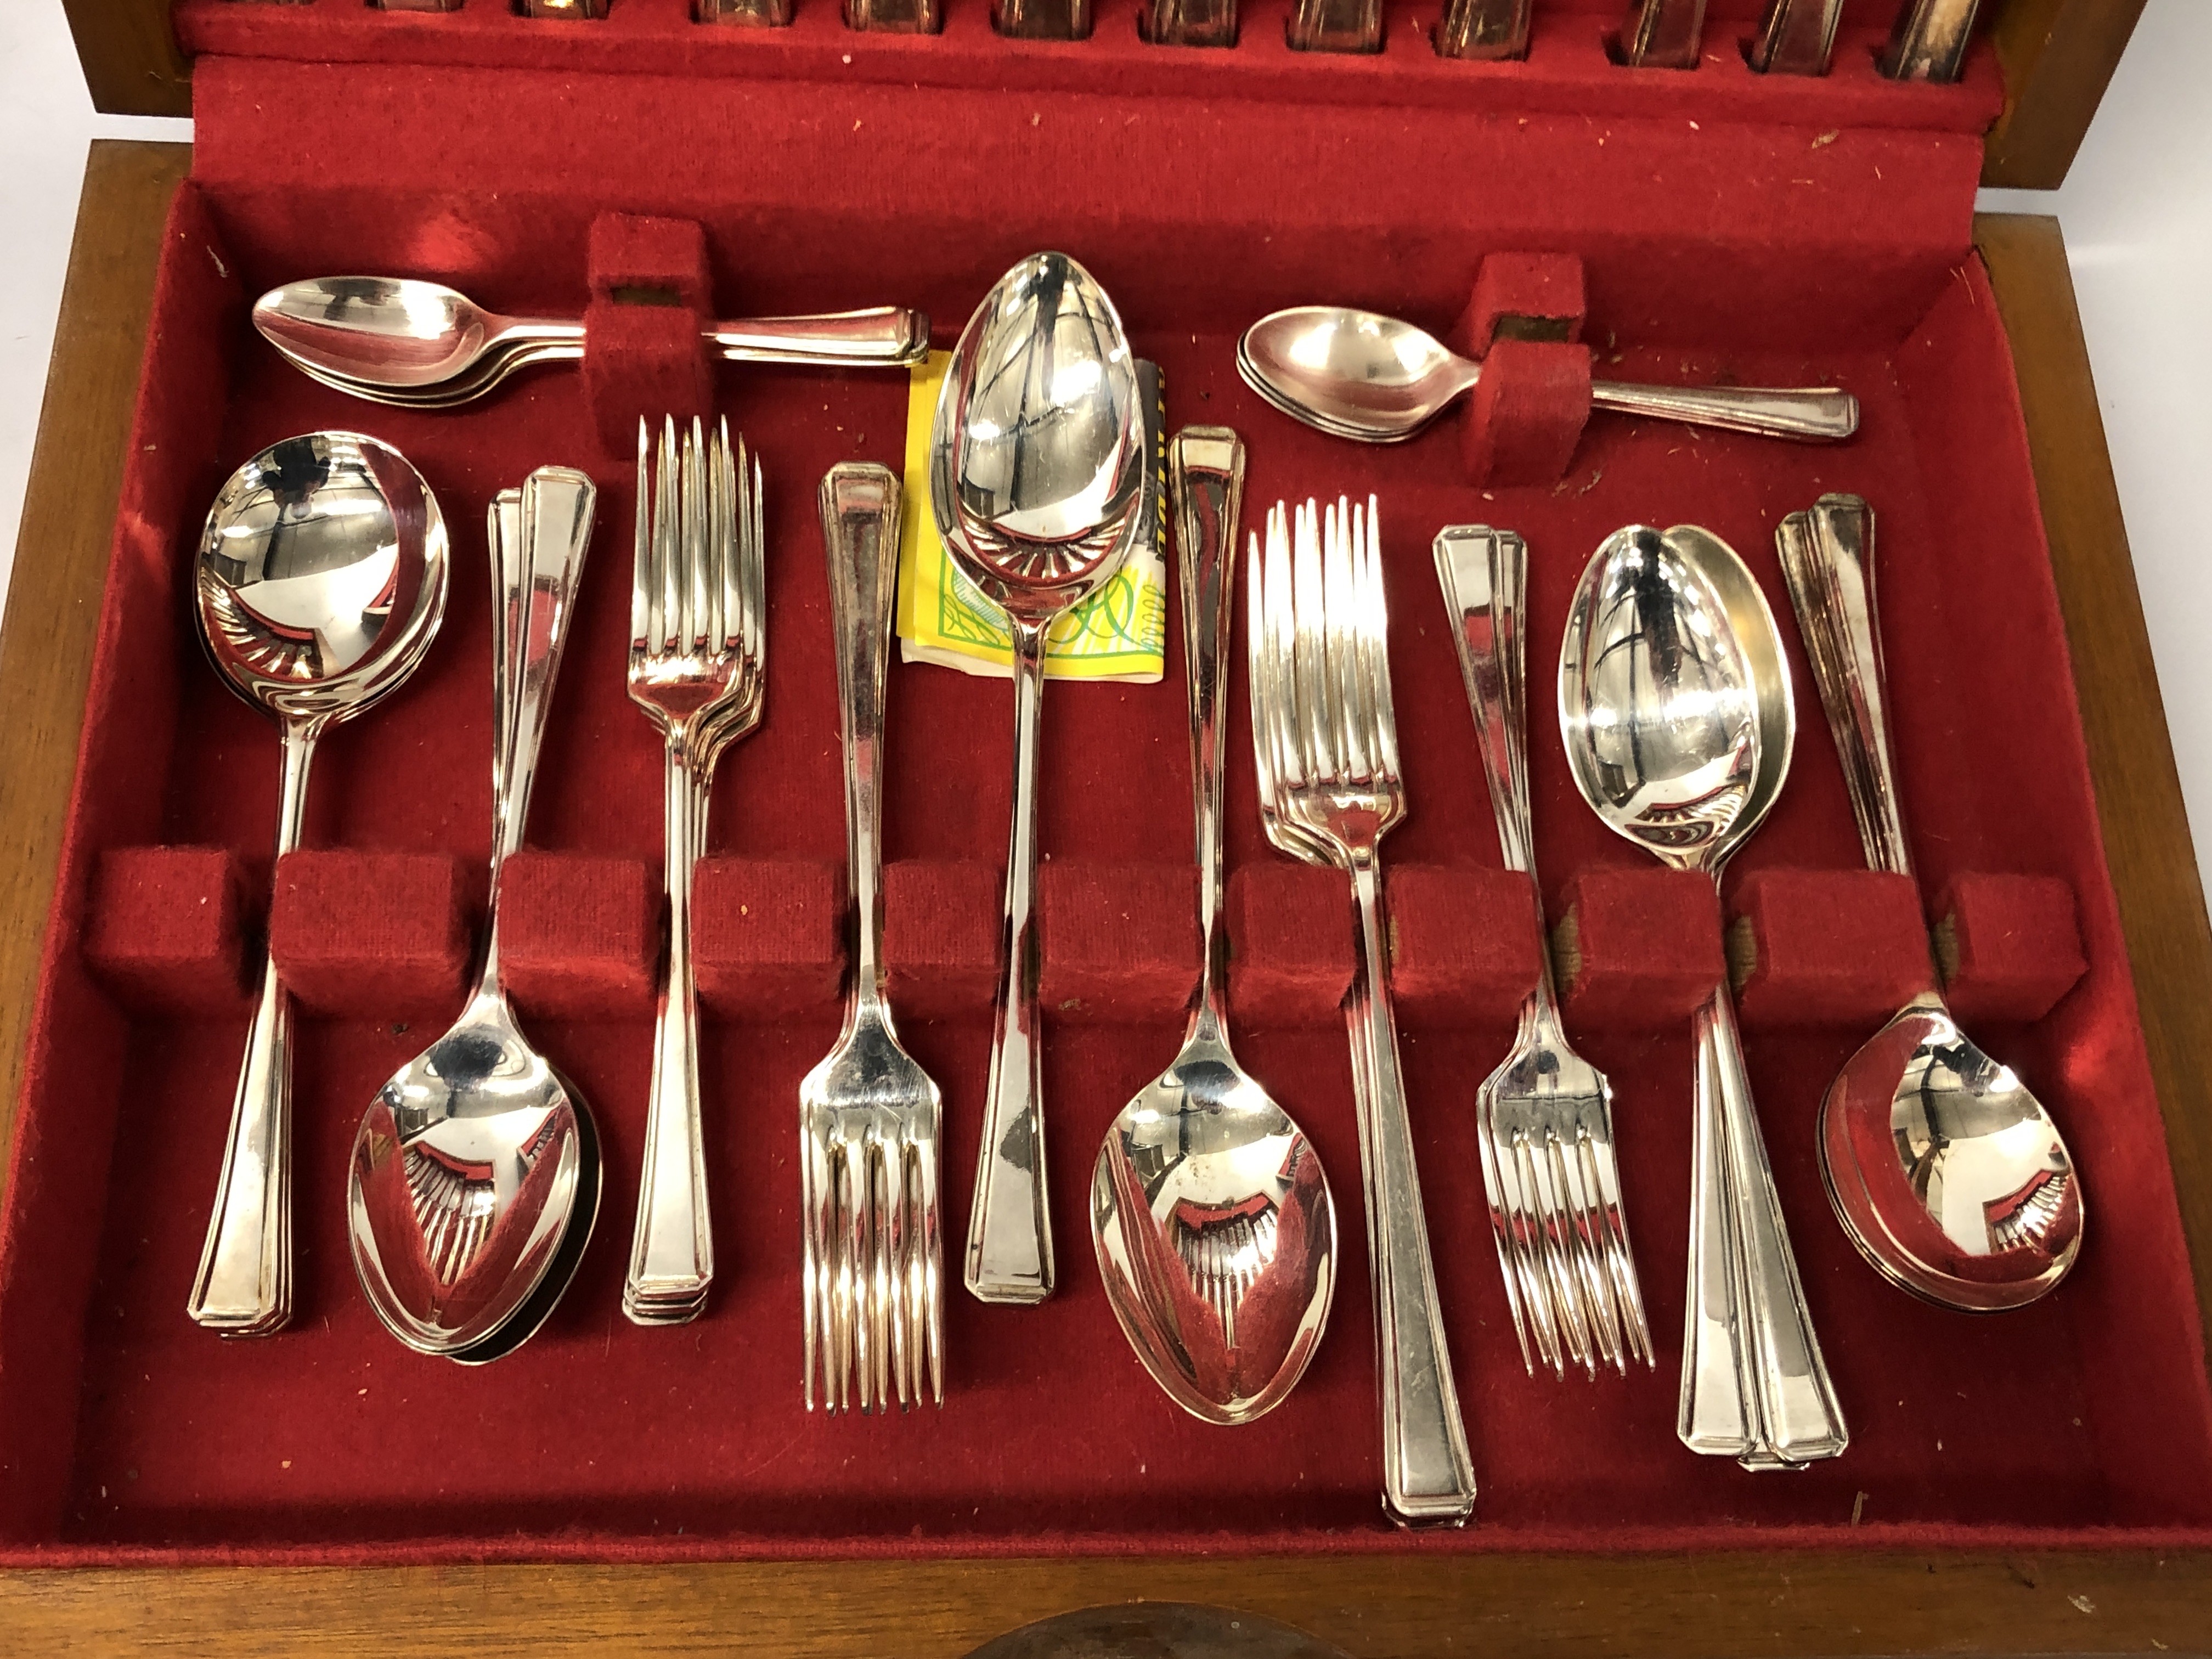 TWO 6 PLACE SETTING CANTEENS OF CUTLERY (ONE TEASPOON MISSING) - Image 6 of 10